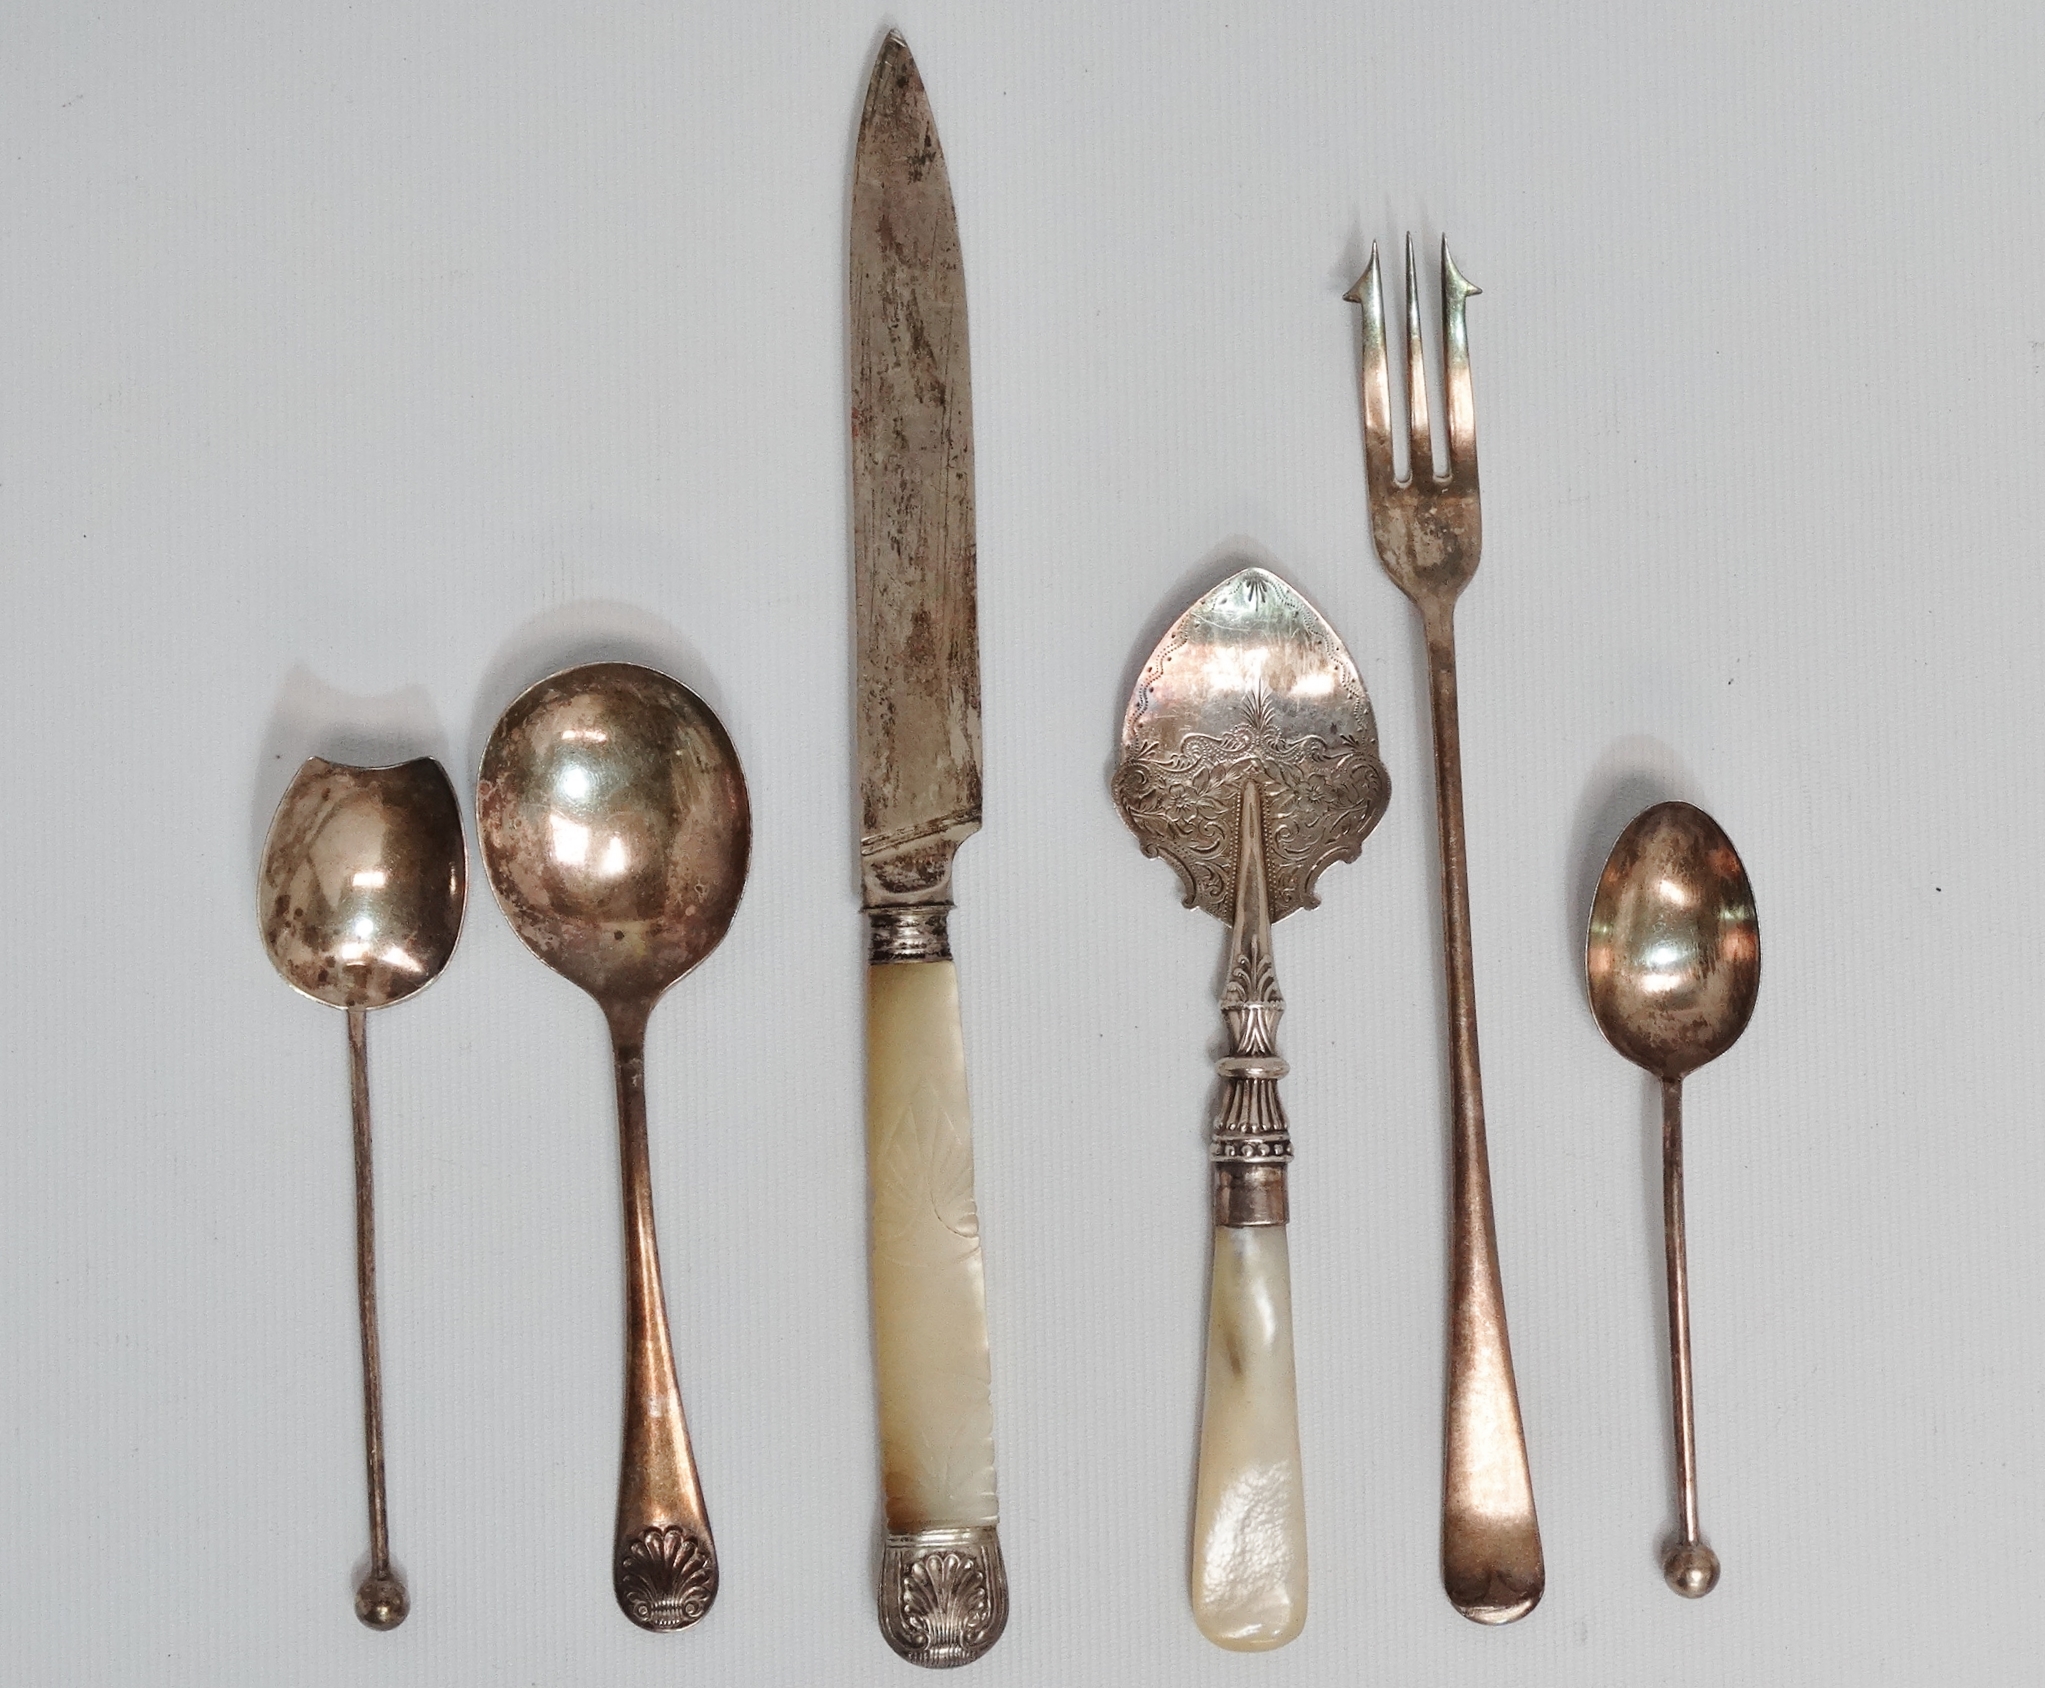 A silver jam spoon with mother-of-pearl handle - Birmingham 1886, the blade with foliate